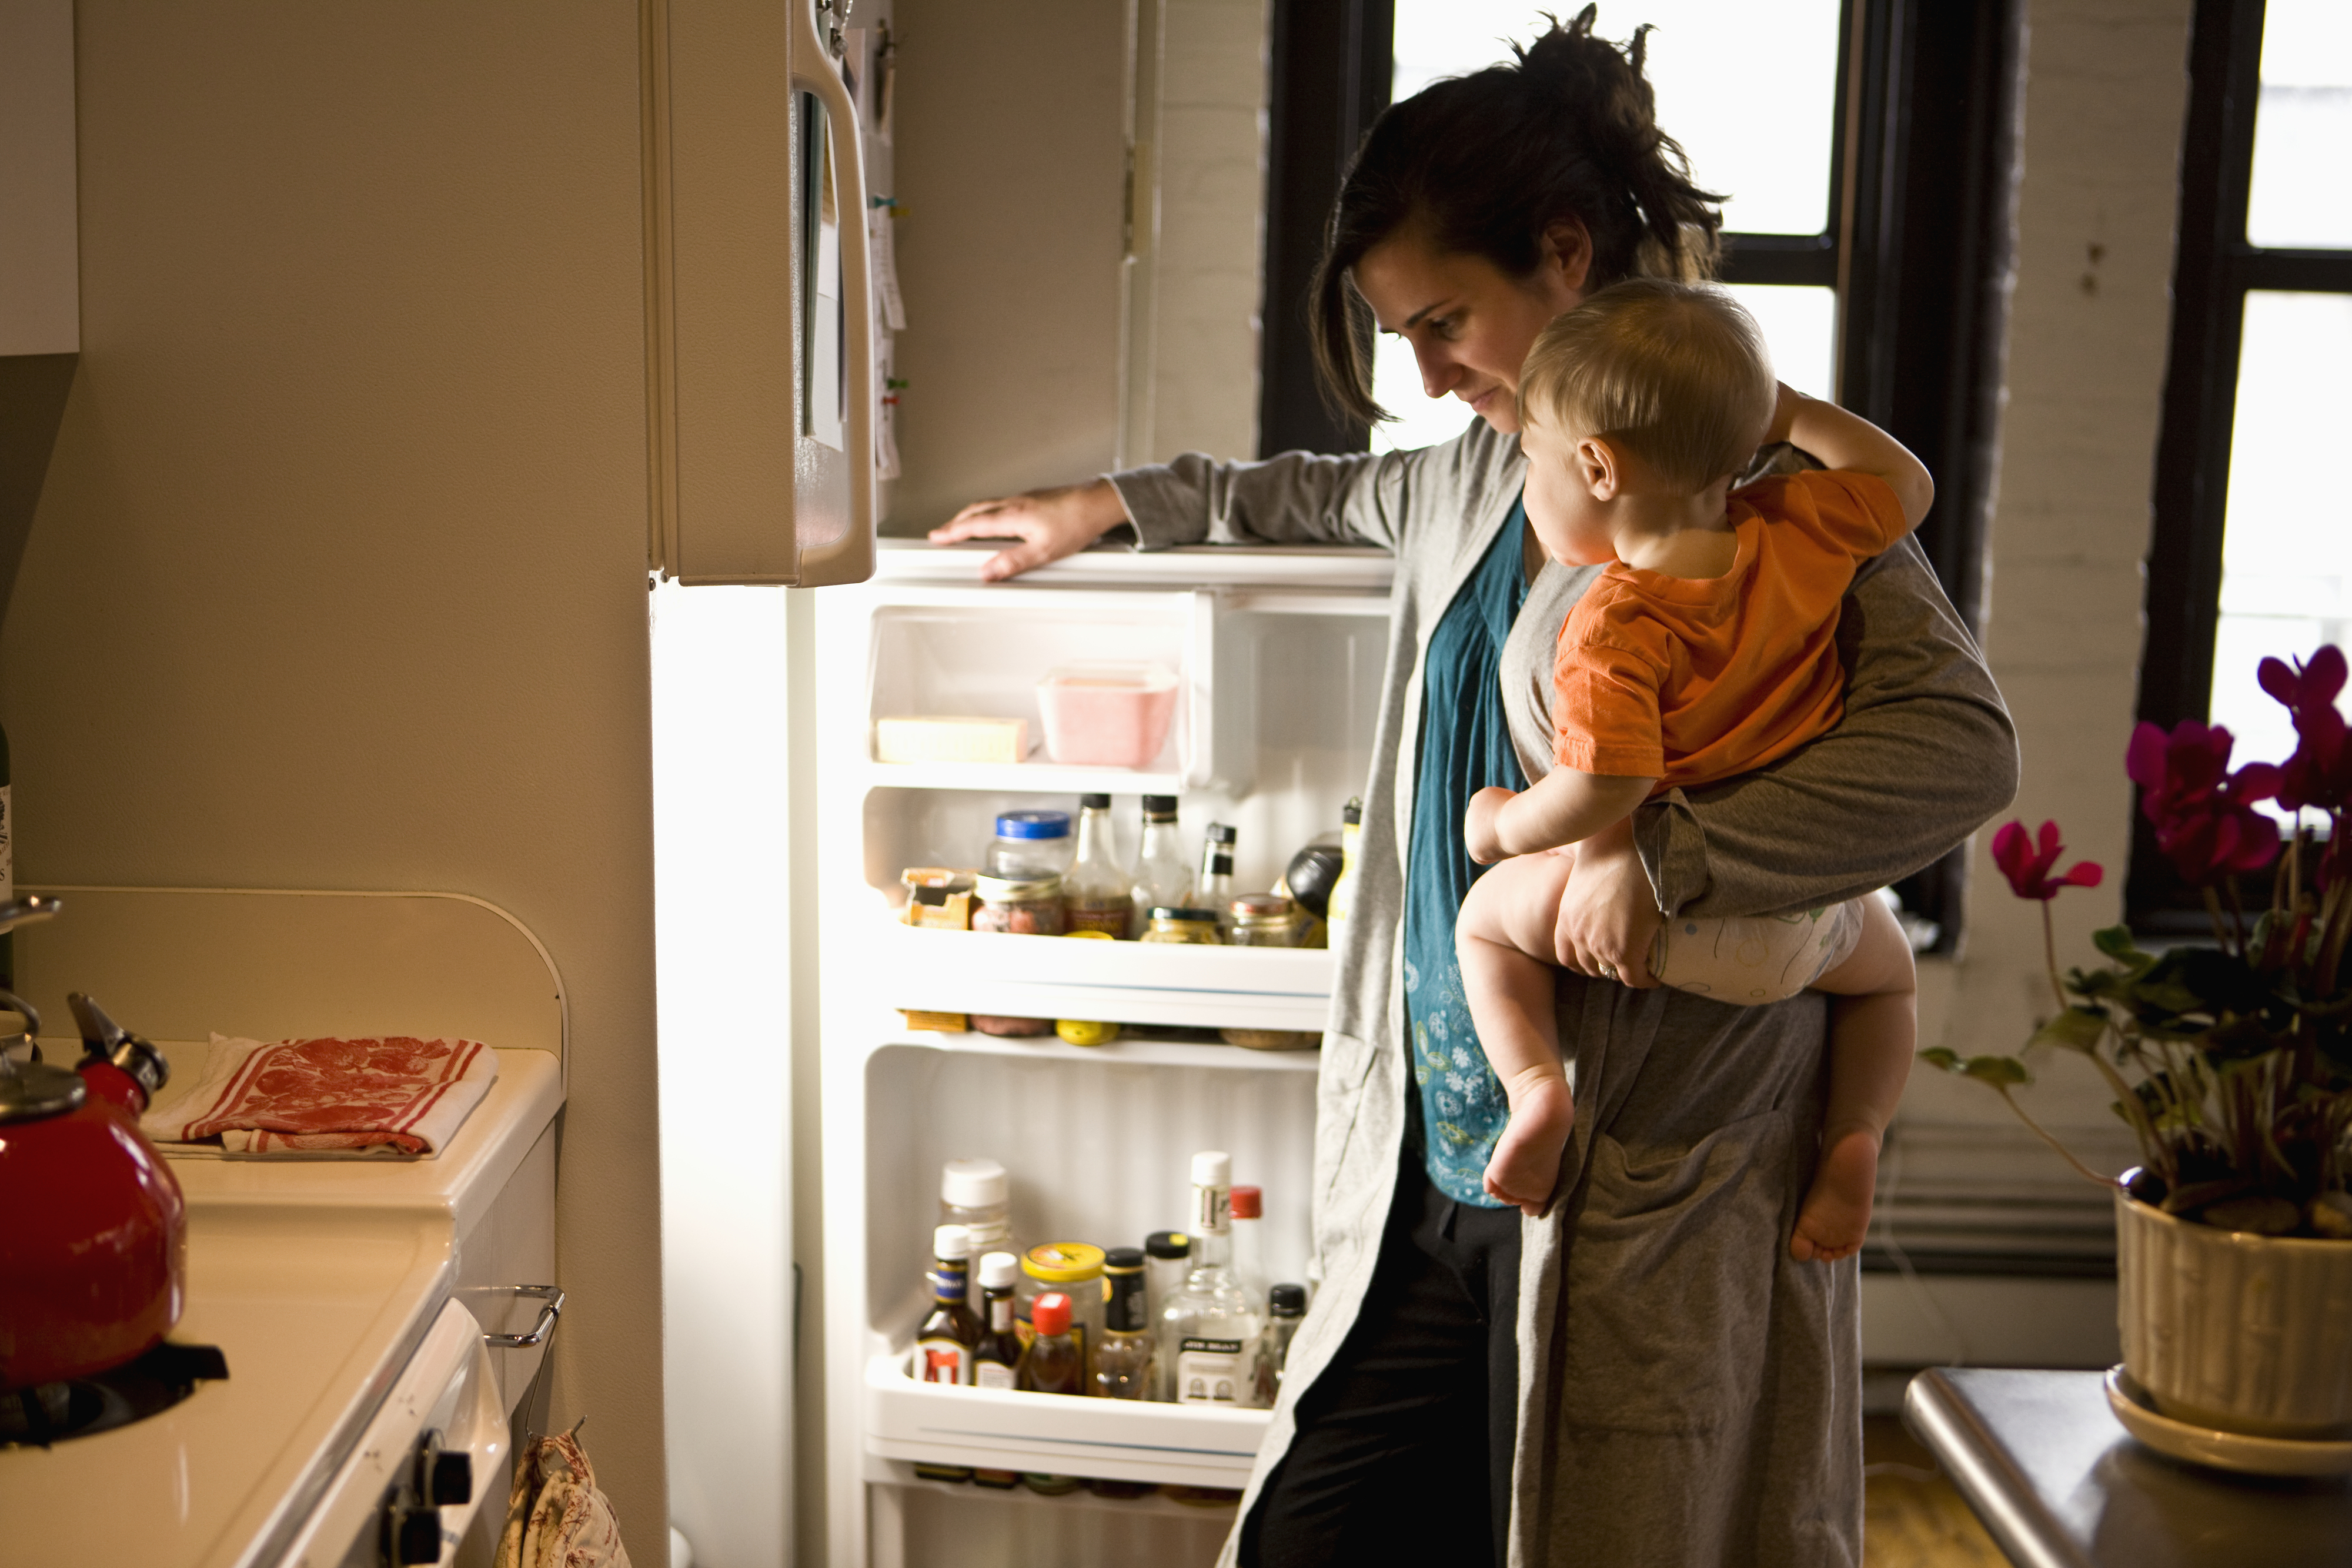 mother and child opening up a white refrigerator in the kitchen